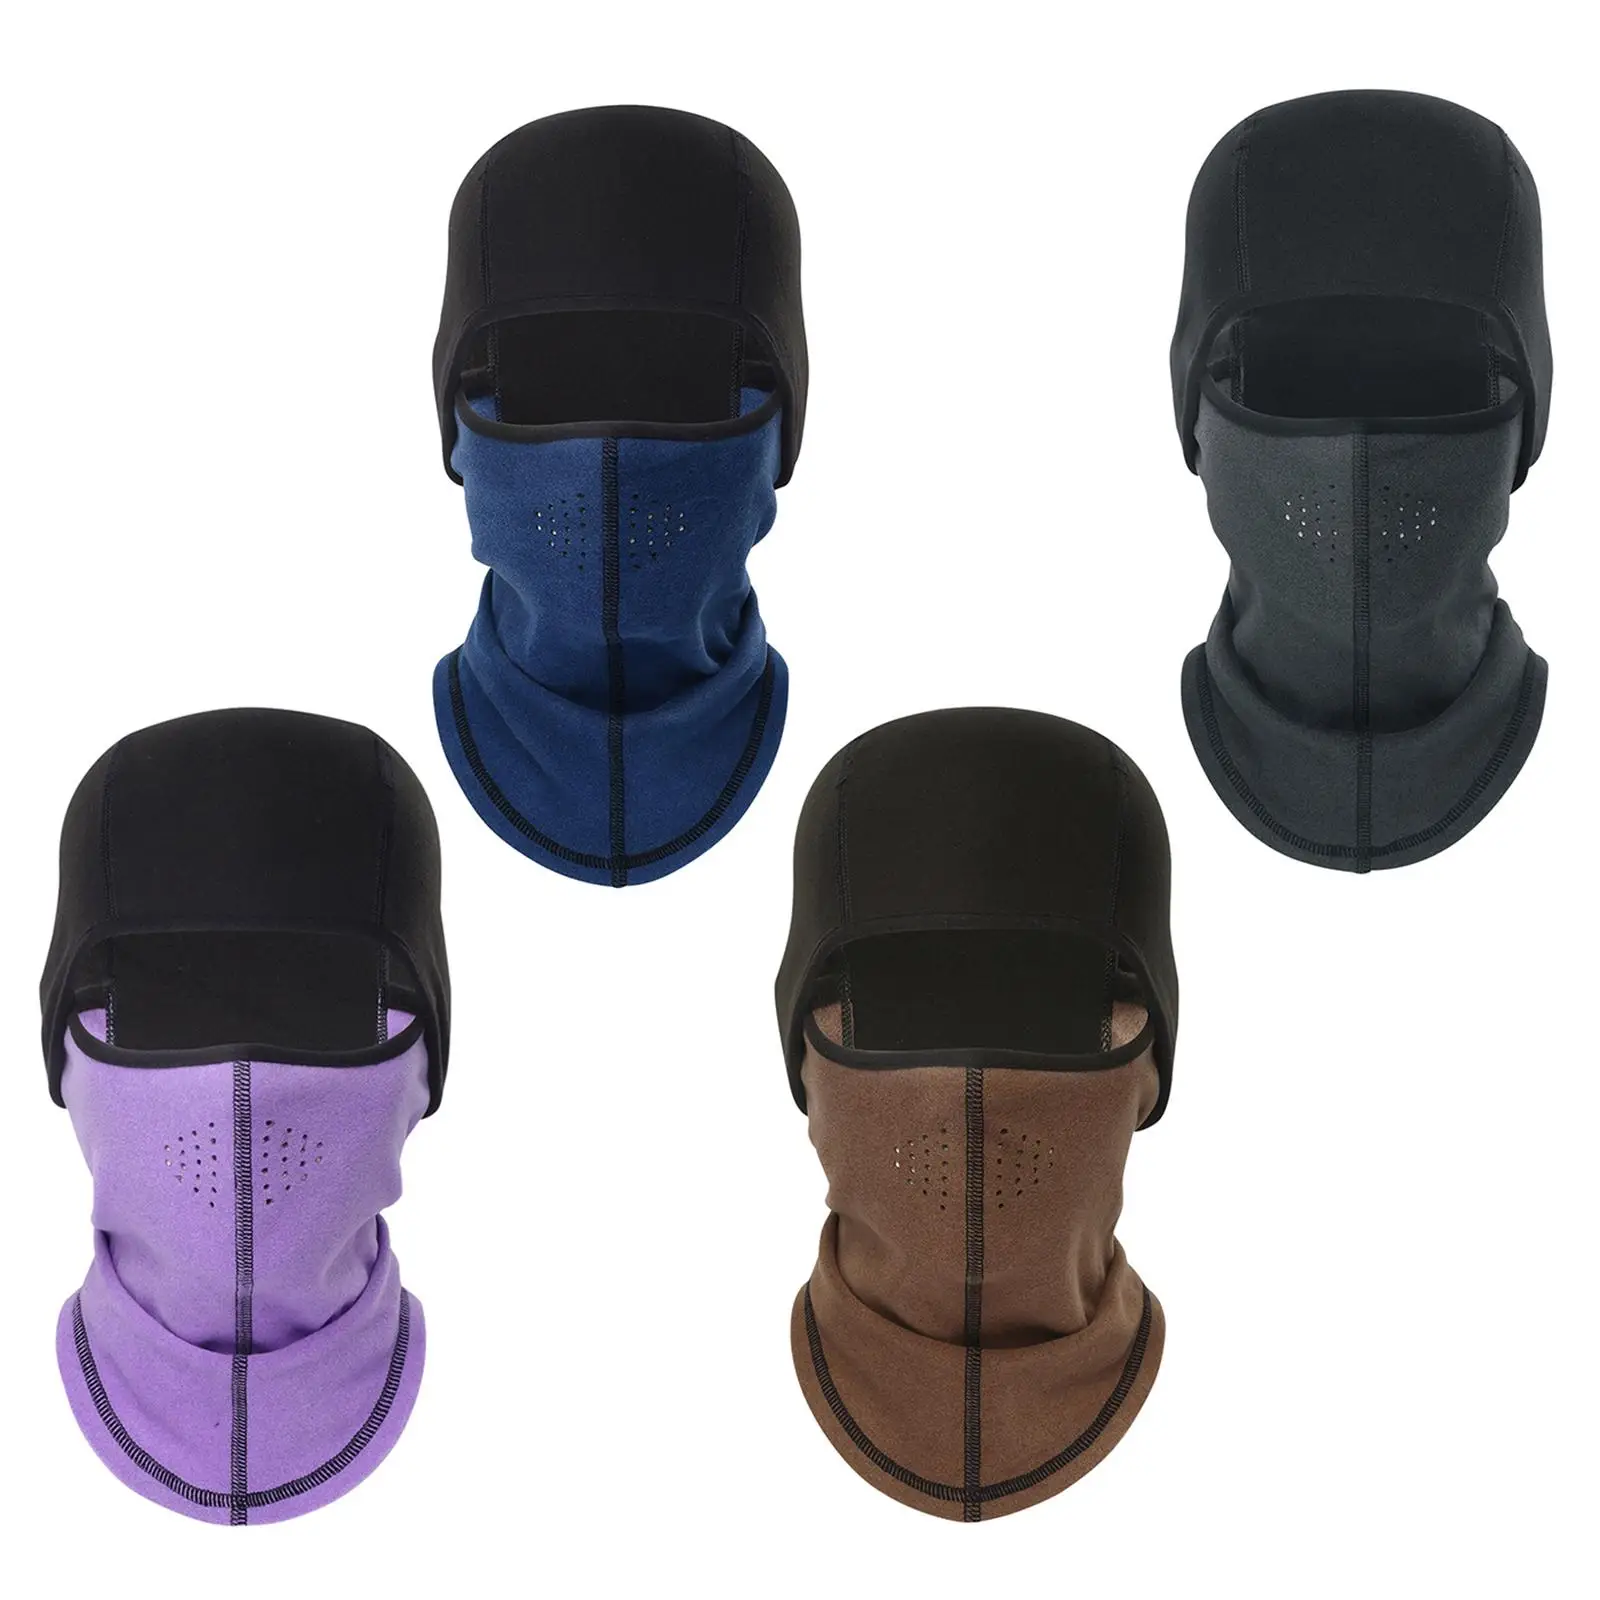 Balaclava Ski - Winter Cover for Extreme Cold Weather -